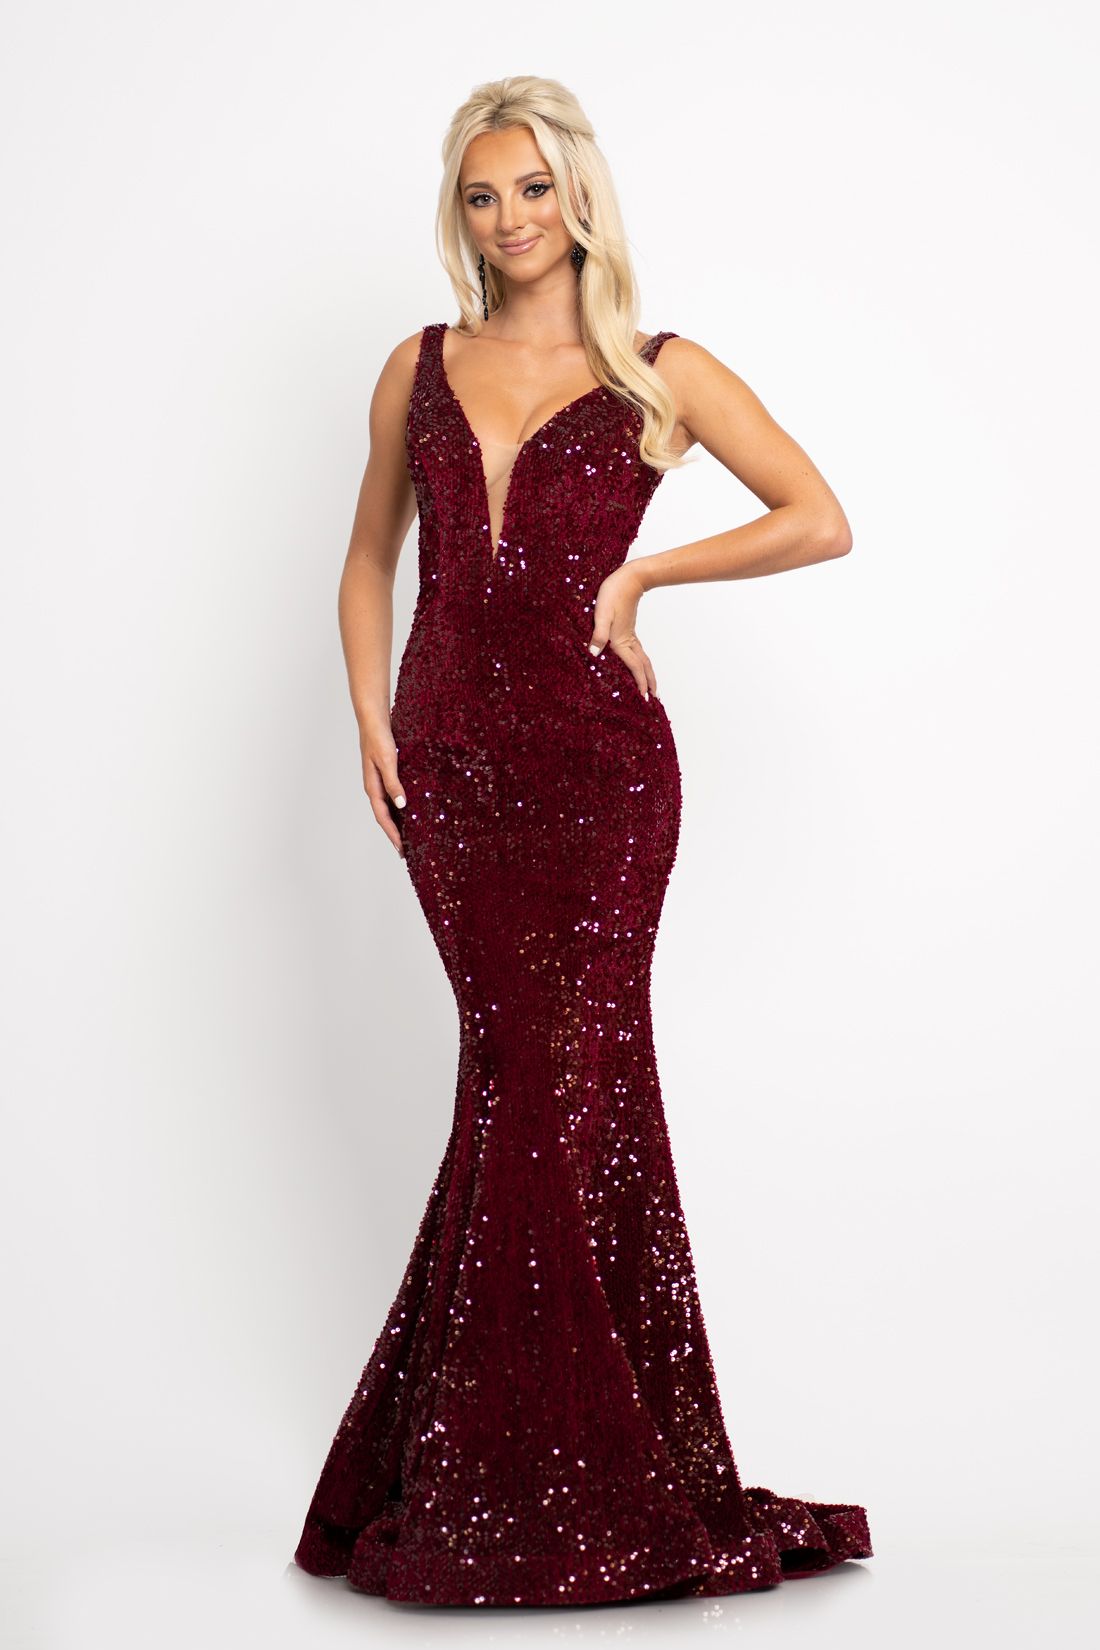 Johnathan Kayne 2237 This long prom dress has a plunging v neckline with mesh panel and a mid v back and is made of luxurious stretch velvet scattered with sequins.  The long mermaid skirt on this pageant gown has a sweeping train. Colors  Crimson, Emerald  Sizes  00, 0, 2, 4, 6, 8, 10, 12, 14, 16, 18, 20, 22